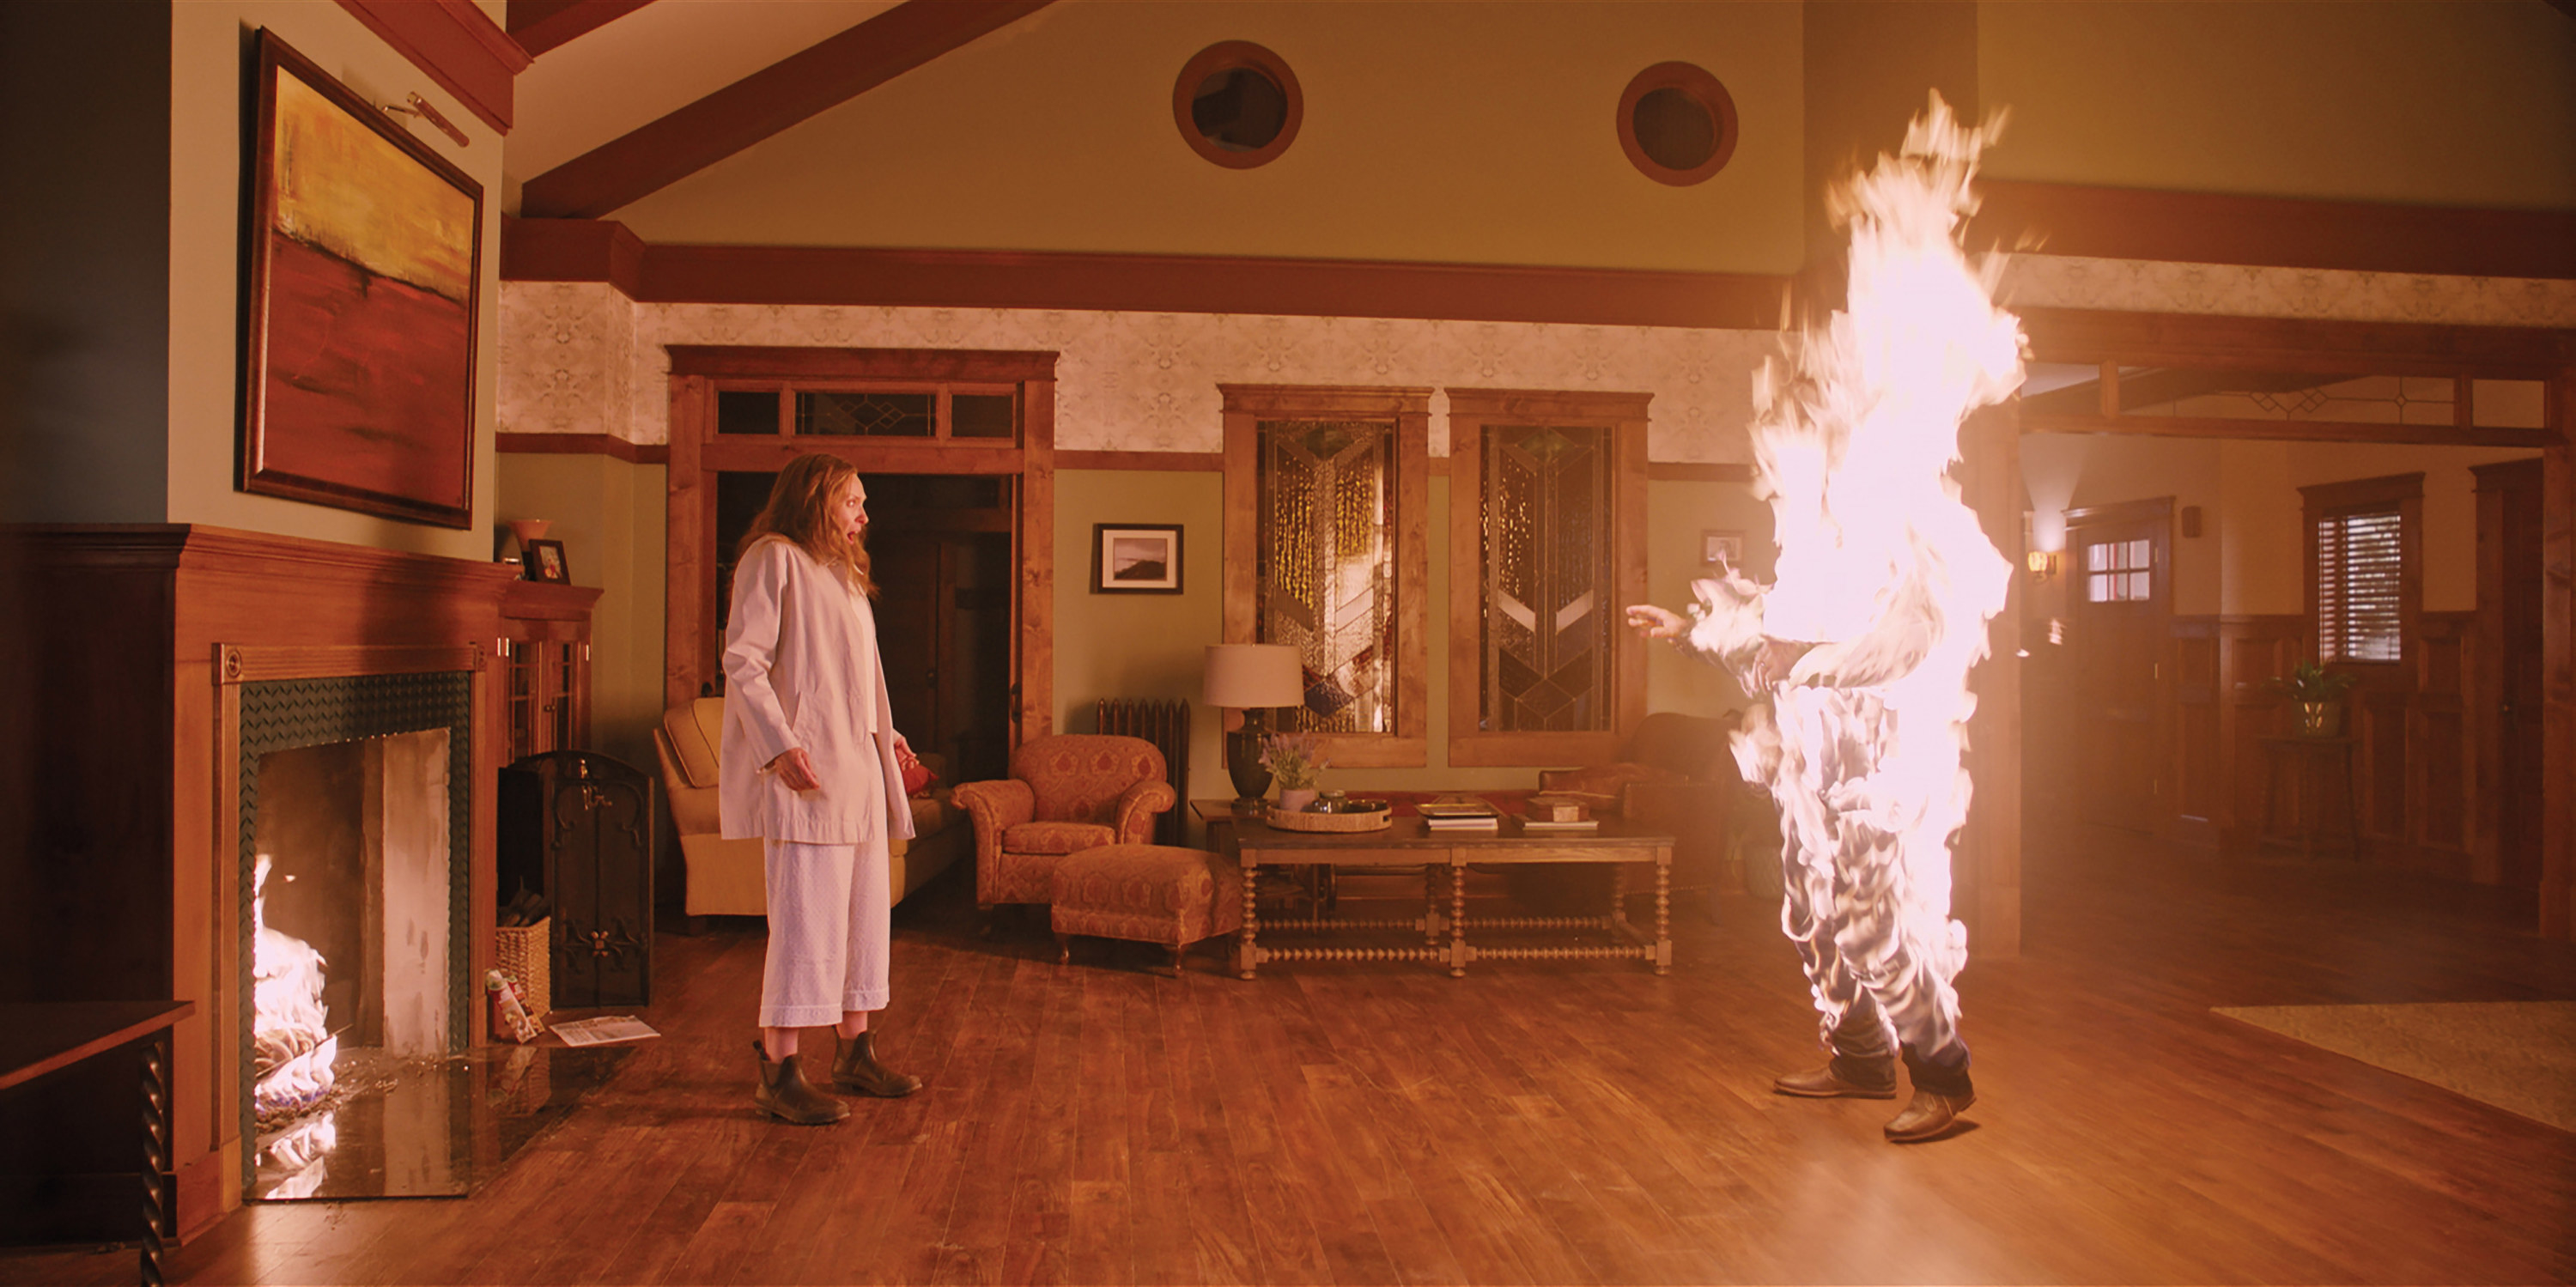 Toni Collette looks at a burning human in her living room